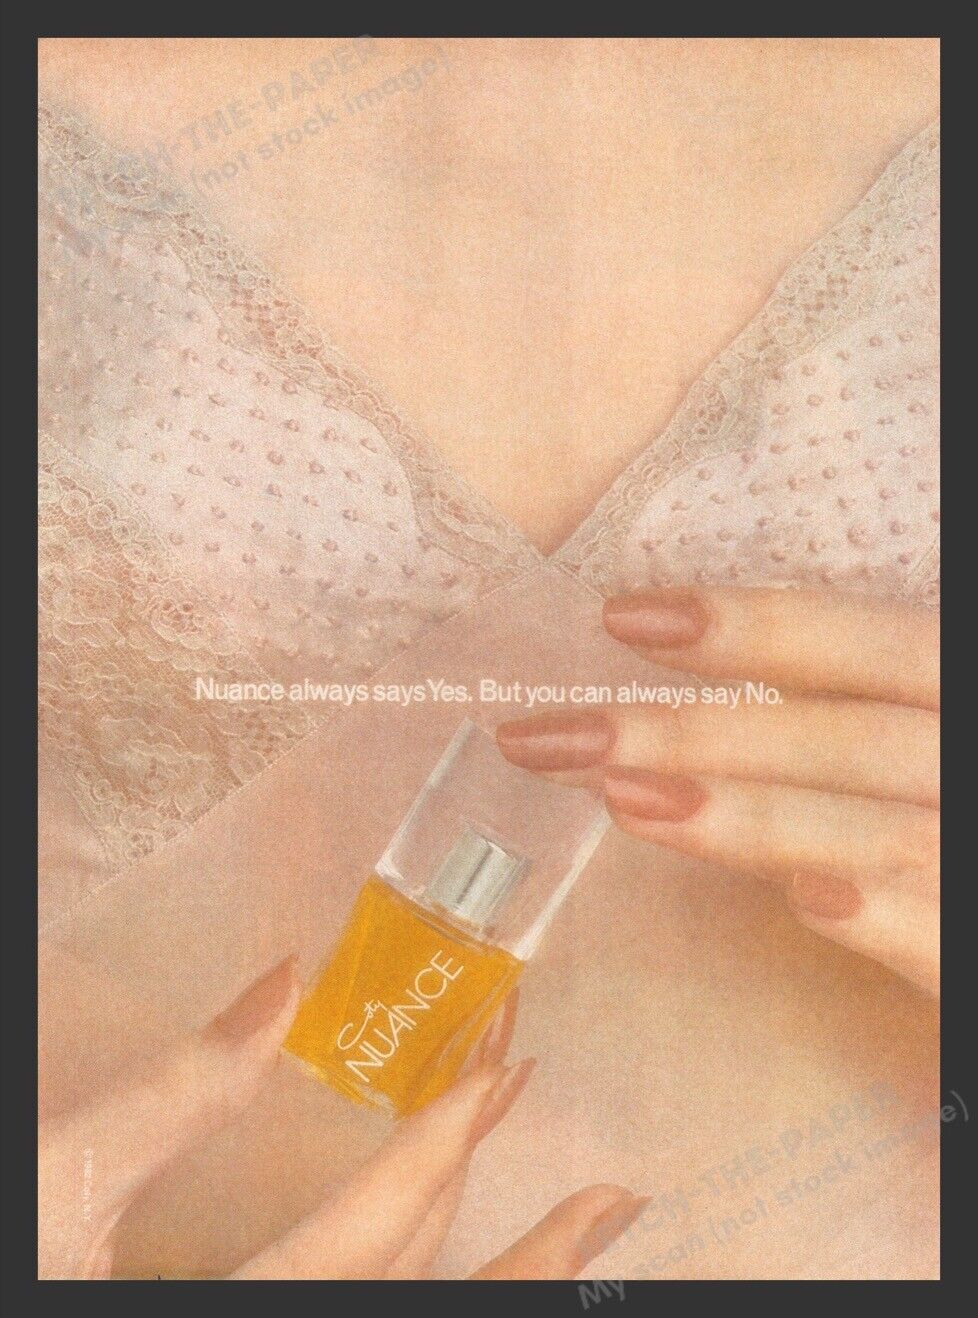 Coty Nuance Fragrance Lingerie Cleavage 1980s Print Advertisement Ad 1984